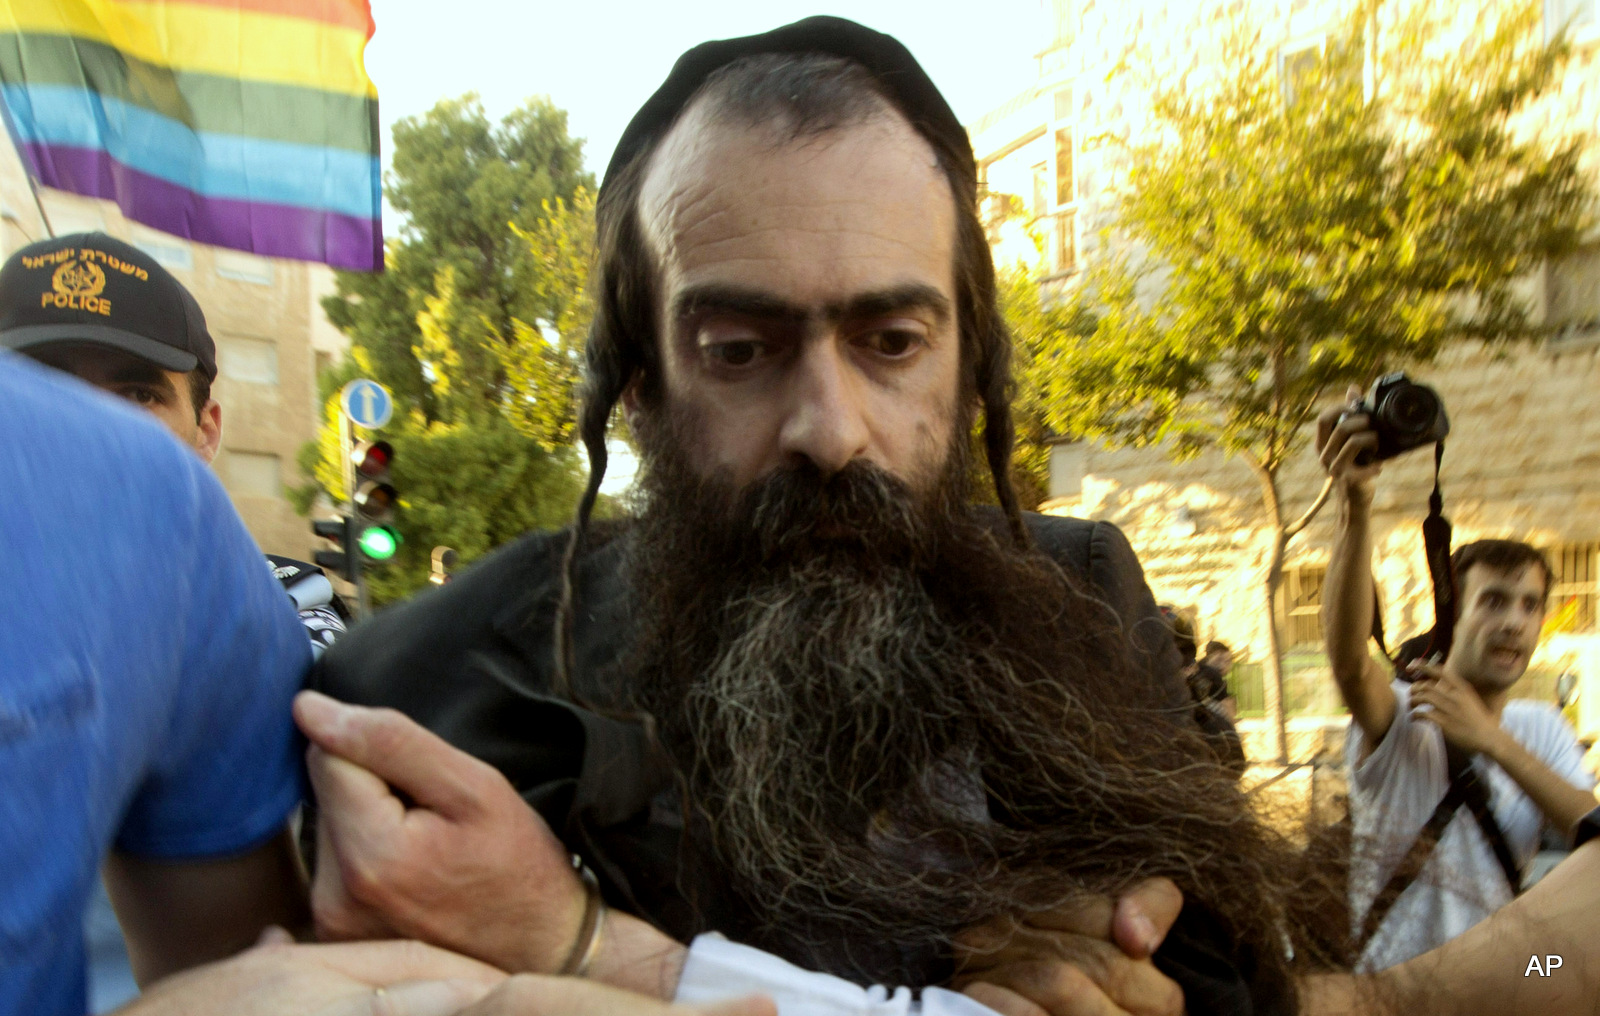 Ultra Orthodox Jew Yishai Schlissel is detained by plain-clothes police officers after he stabbed people during a gay pride parade in Jerusalem on Thursday, July 30, 2015. Schlisse was recently released from prison after serving a term for stabbing several people at a gay pride parade in 2005, a police spokeswoman said. 